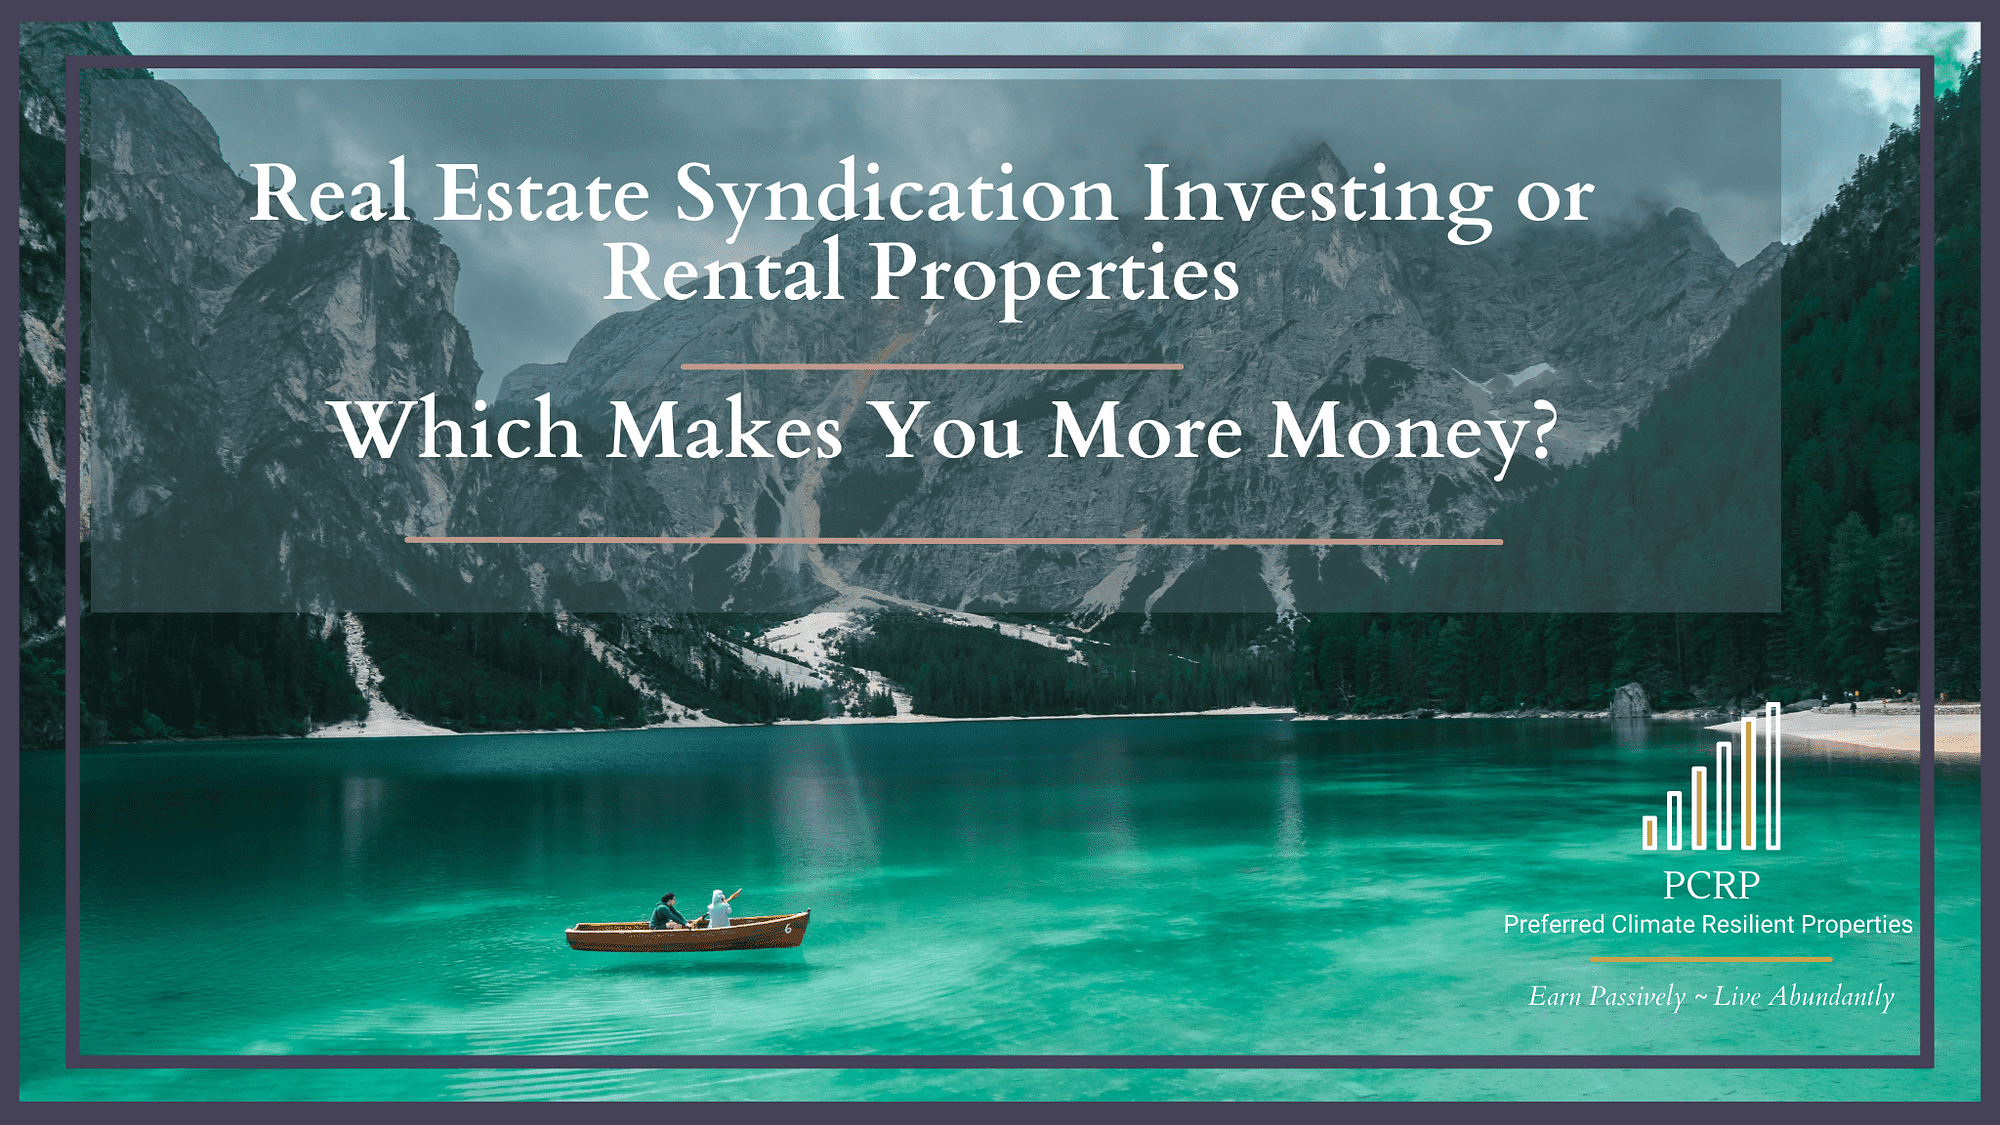 Real estate syndications or rental properties investing which makes you more money?